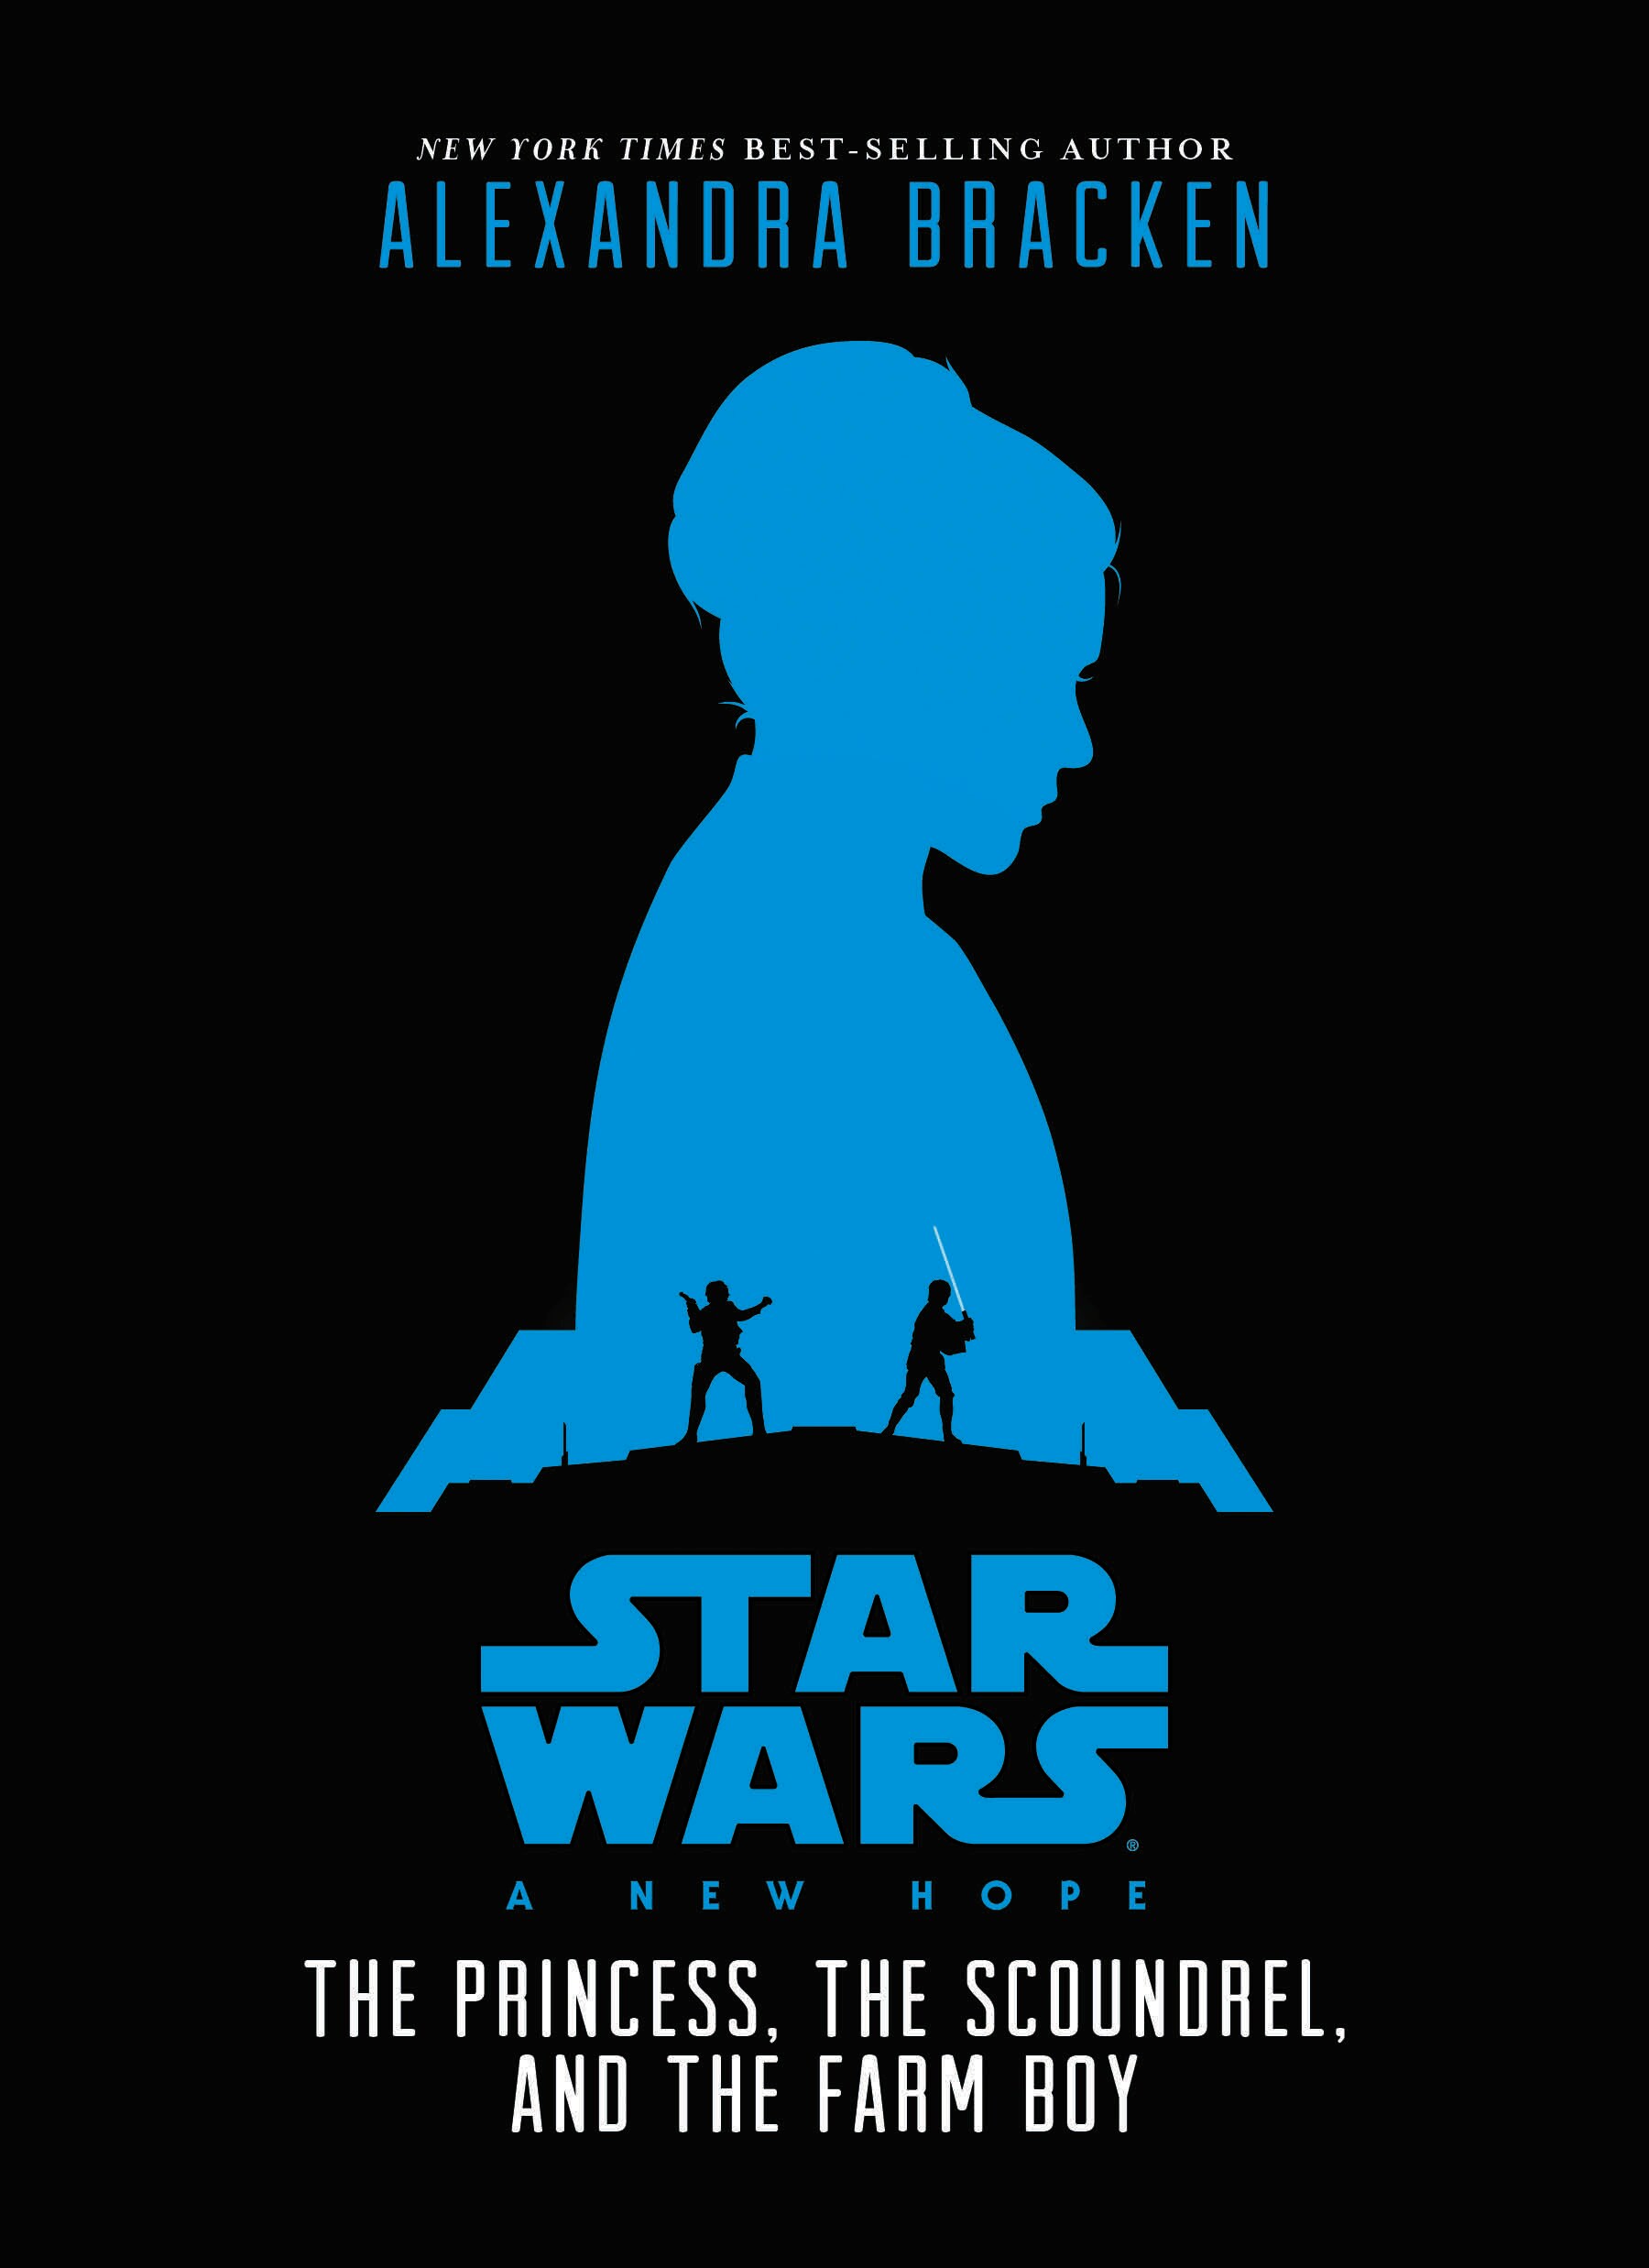 Leia's silhouette dominates the cover of the novel Star Wars: A New Hope - The Princess, the Scoundrel, and the Farm Boy.